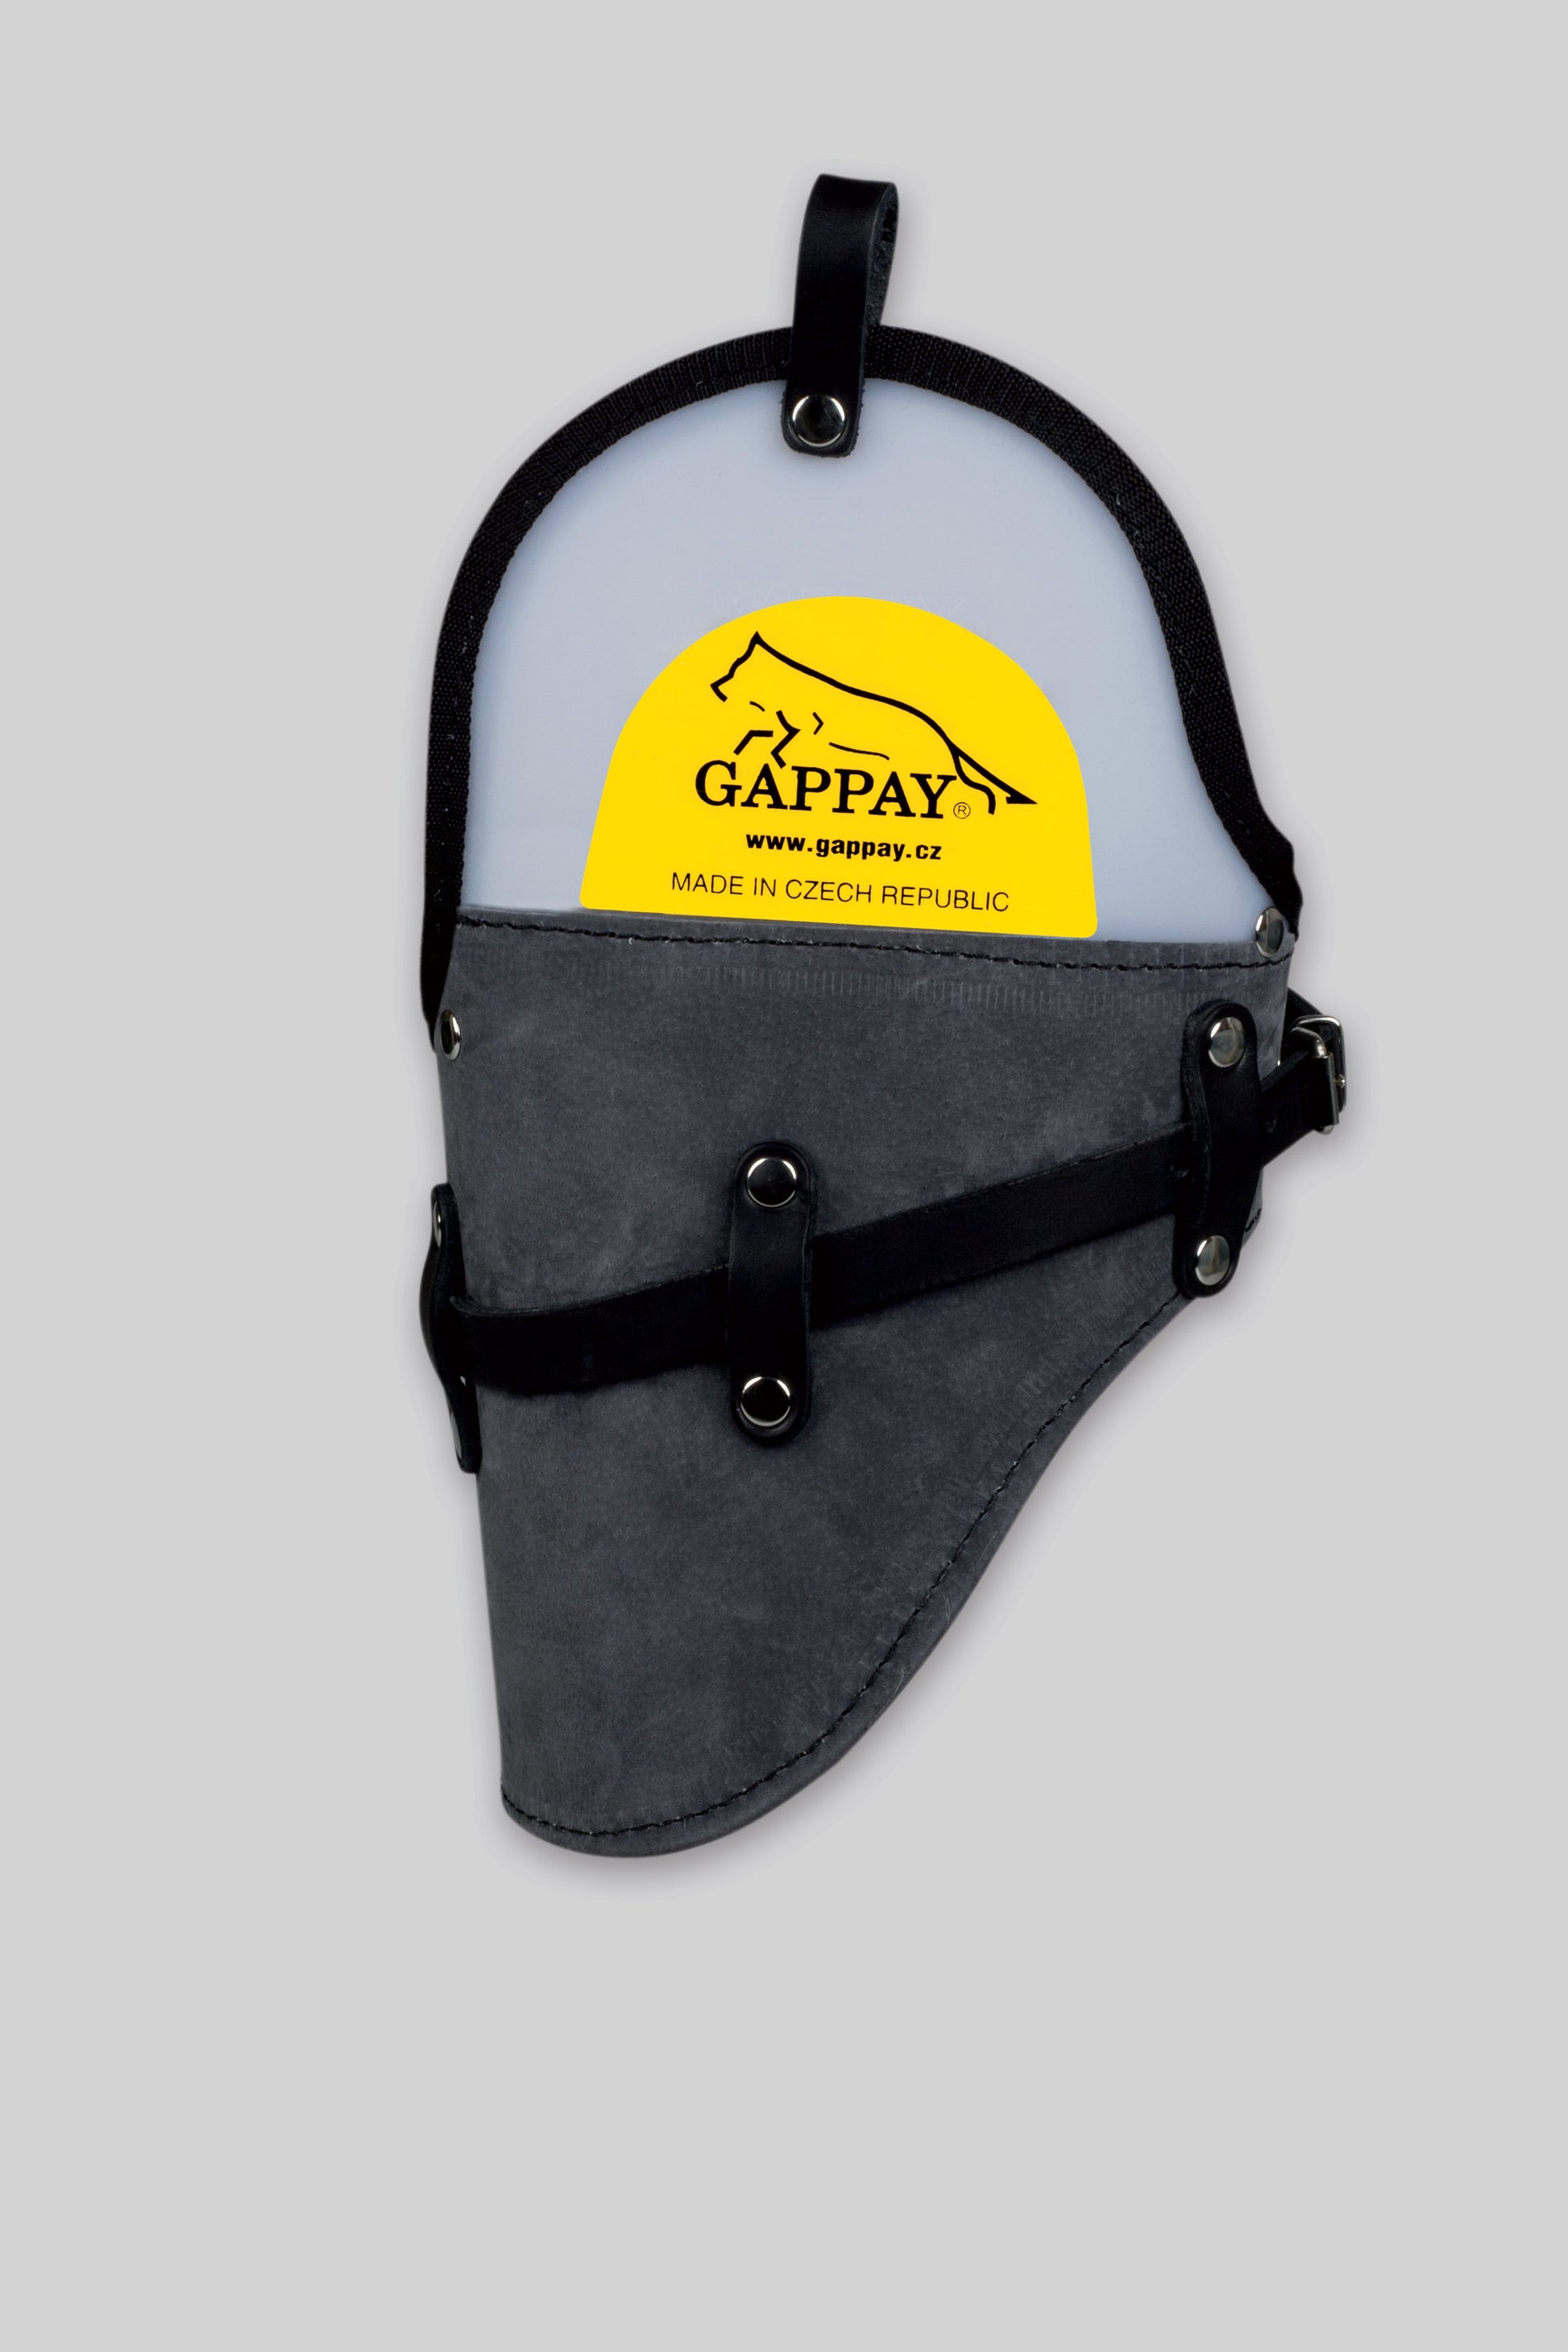 Gappay Top Plastic For Protection Sleeves